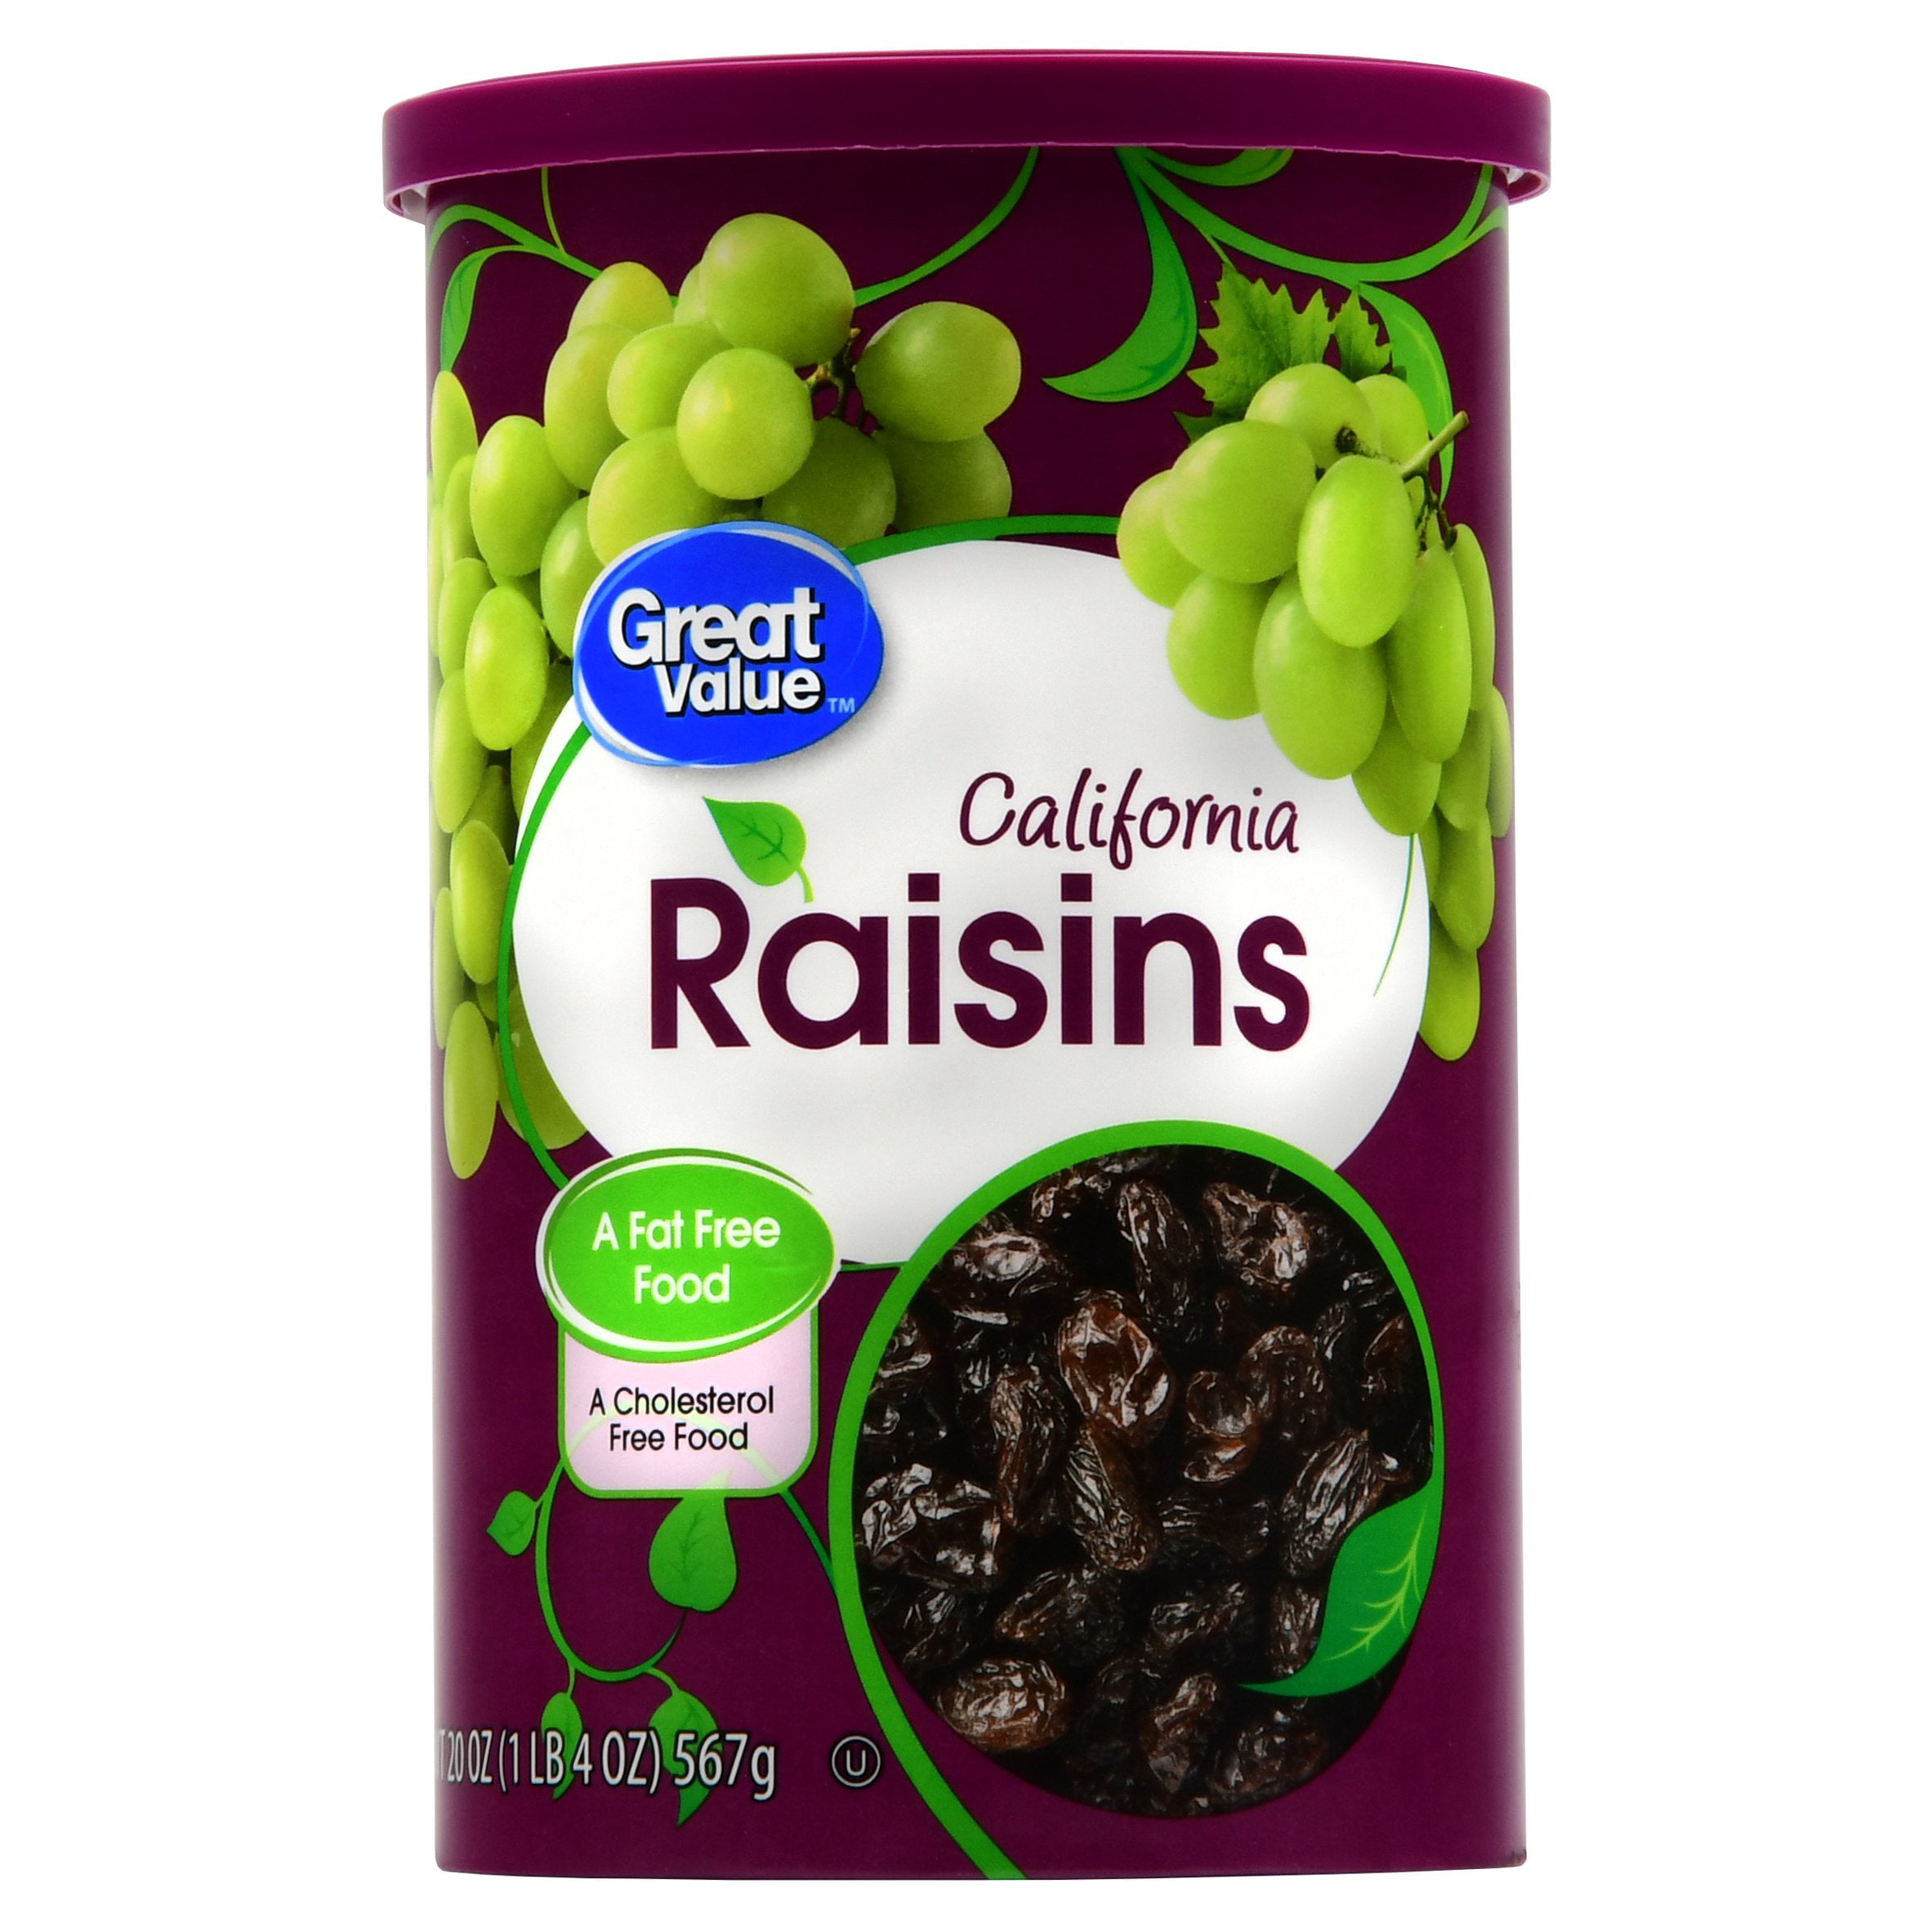 How many raisins are in one gram?